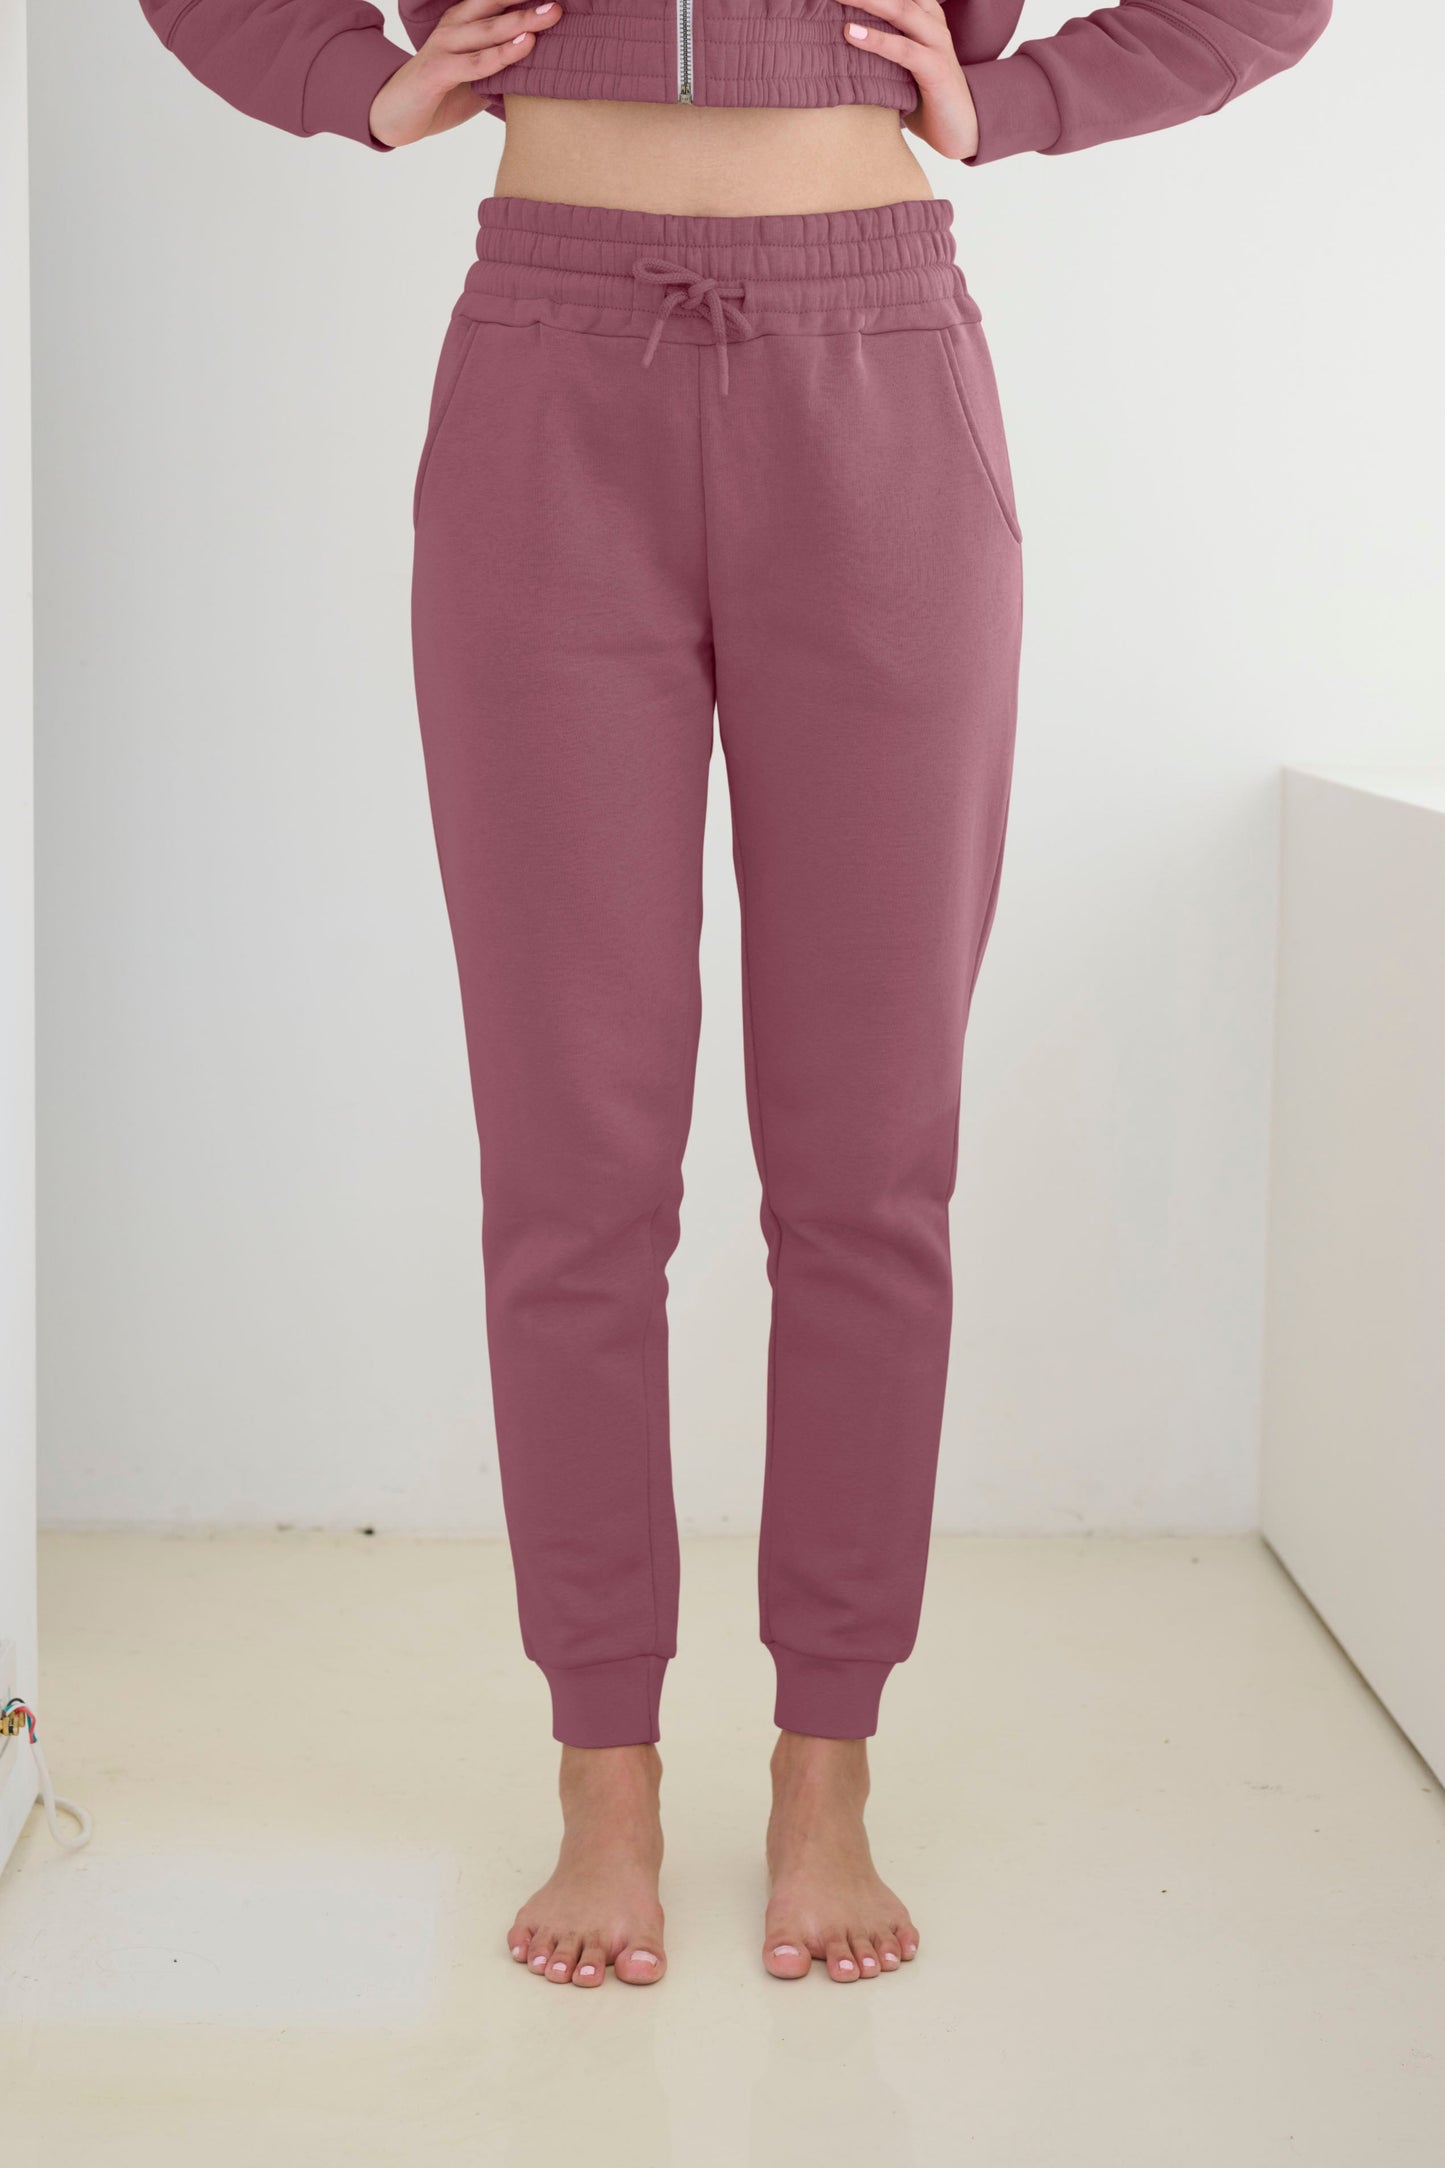 Two Piece Lounge Set. Cropped Zip Hoodie and Jogger - Mauve